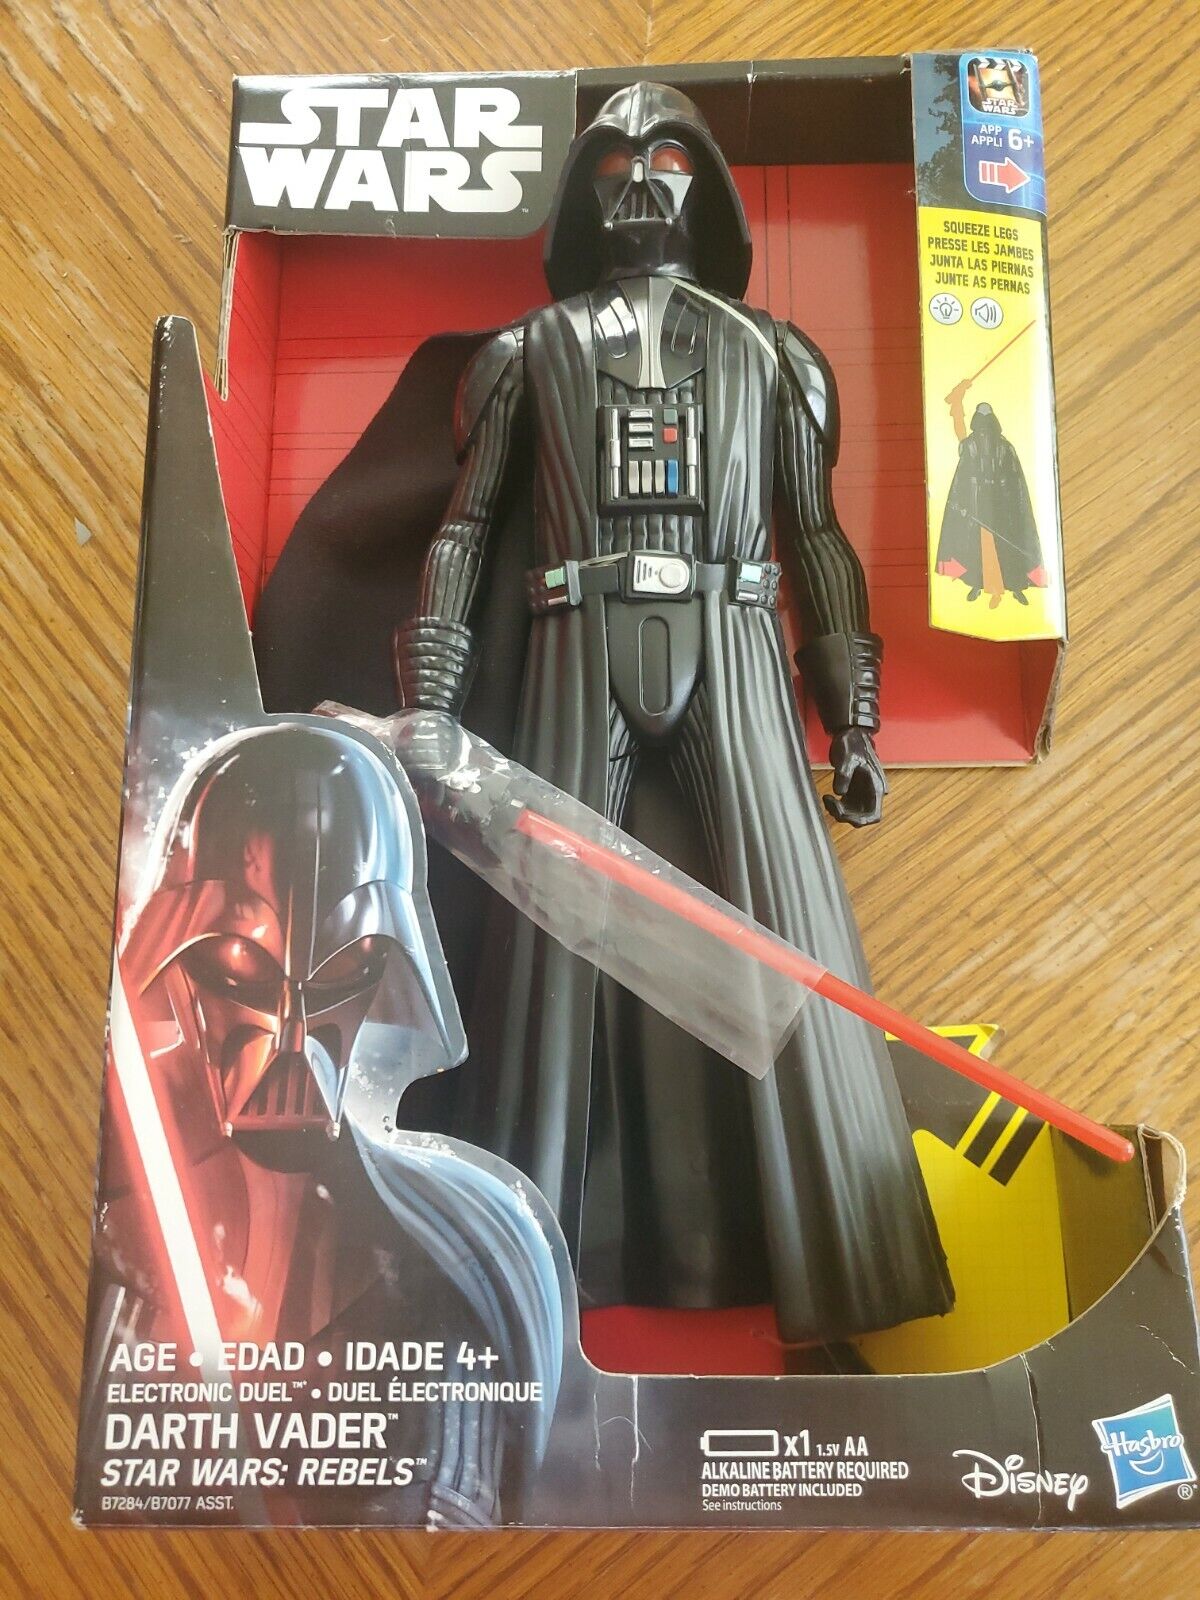 Star Wars Rebels Darth Vader Electronic Duel 12 Inch Action Figure. New works Hasbro